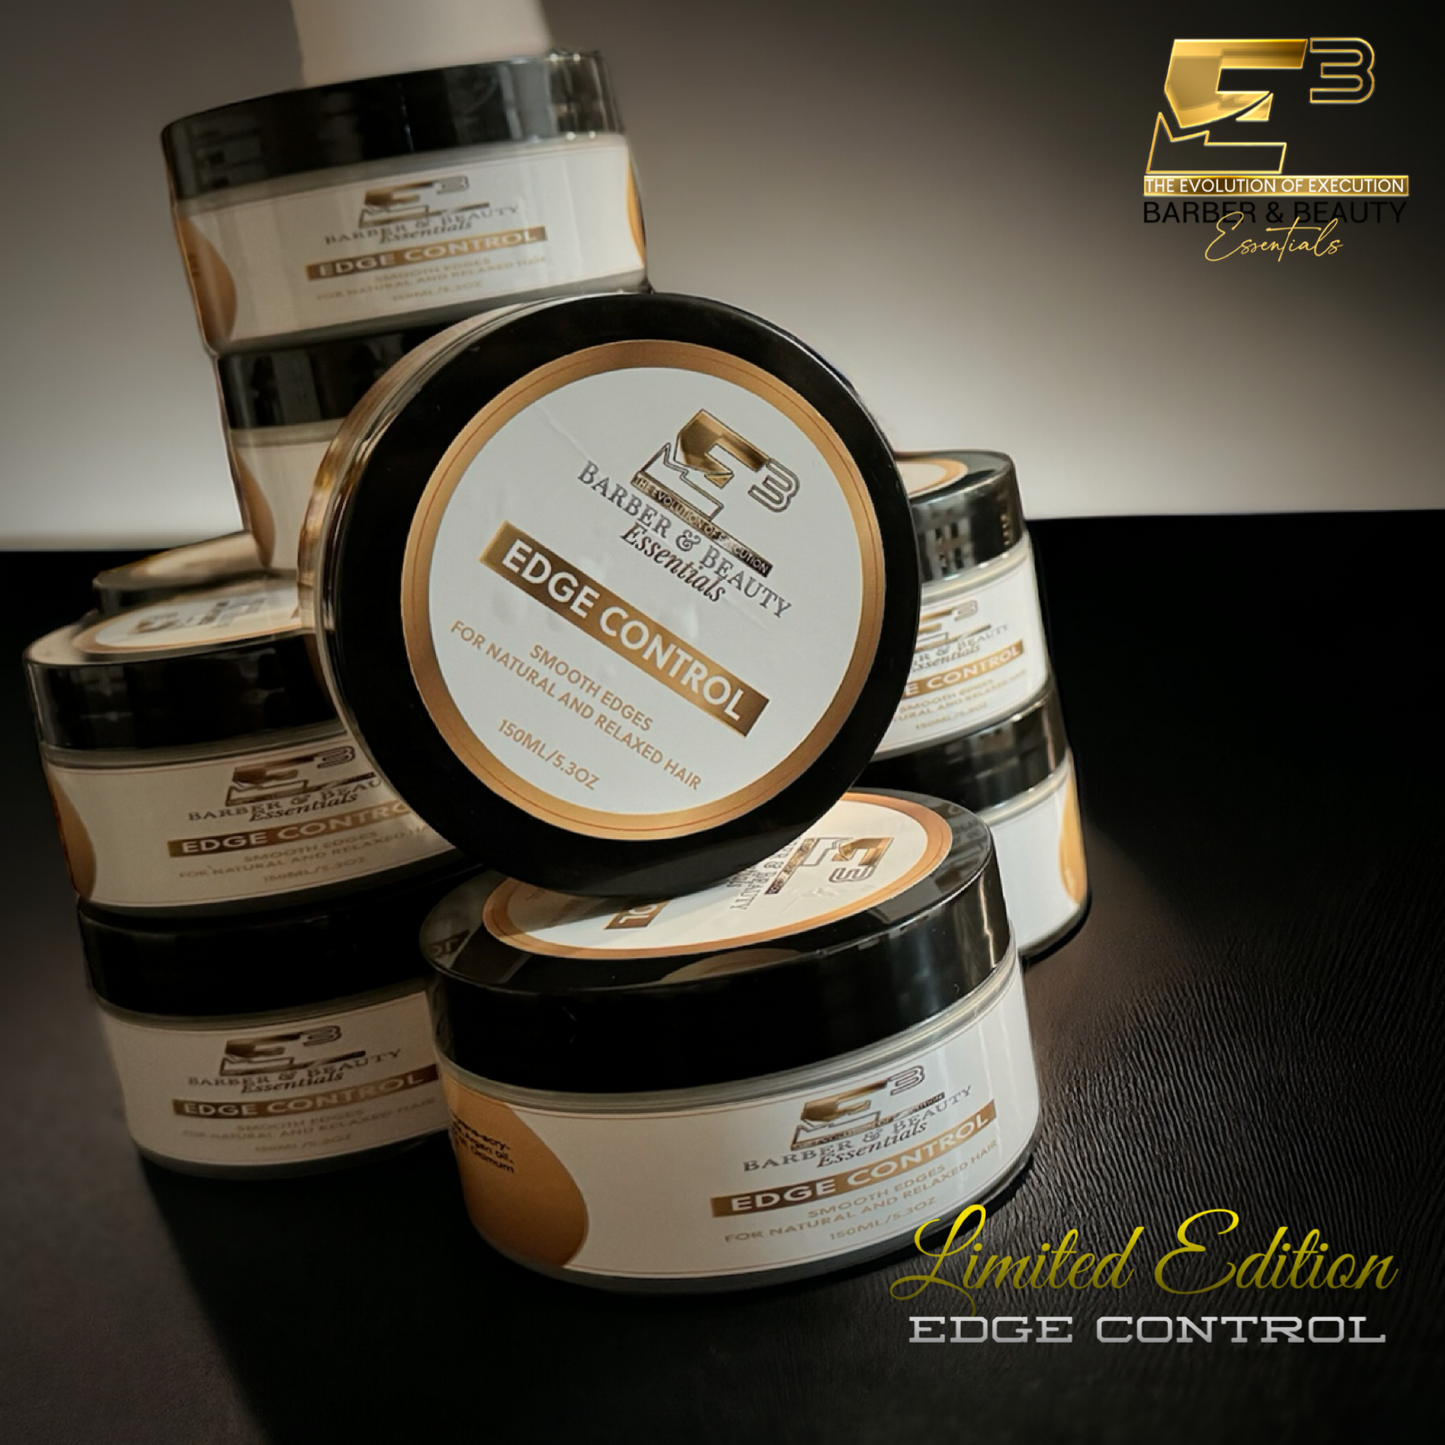 Limited Edition Edge Control